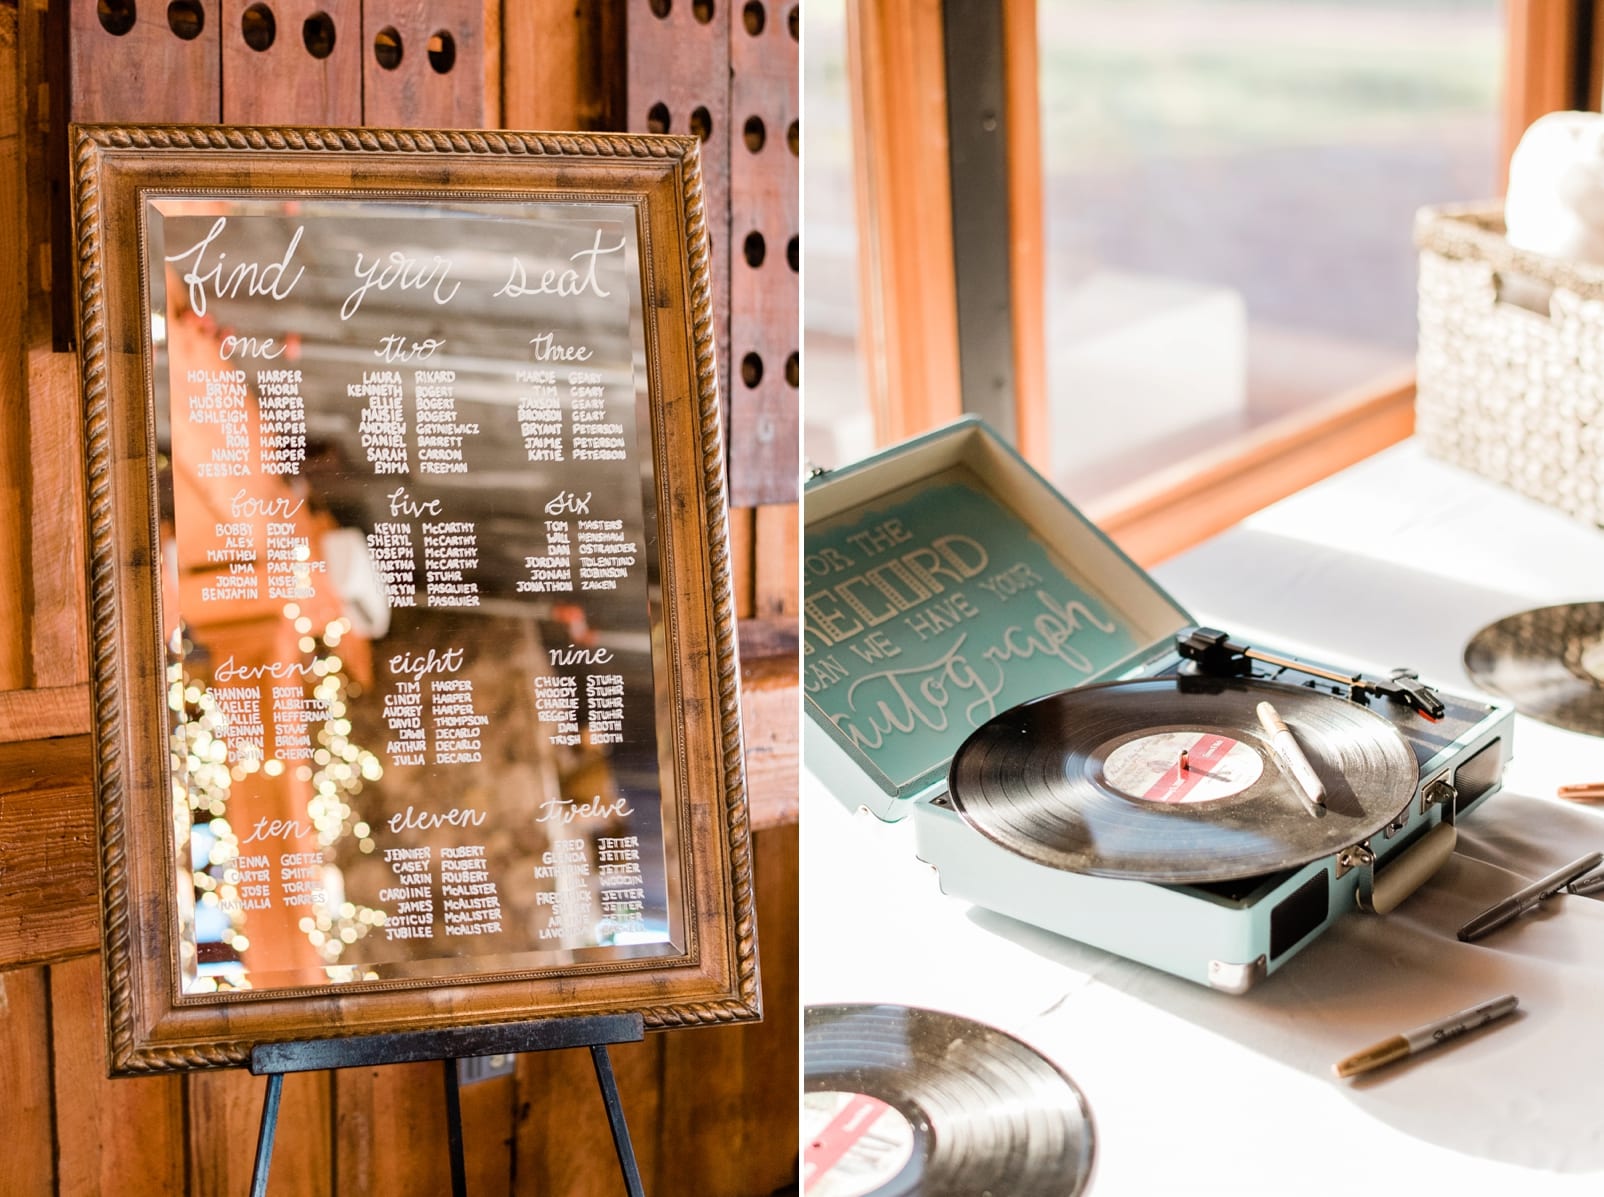 Pavilion at Angus Barn indoor reception with vintage record player and mirror with seating chart photo